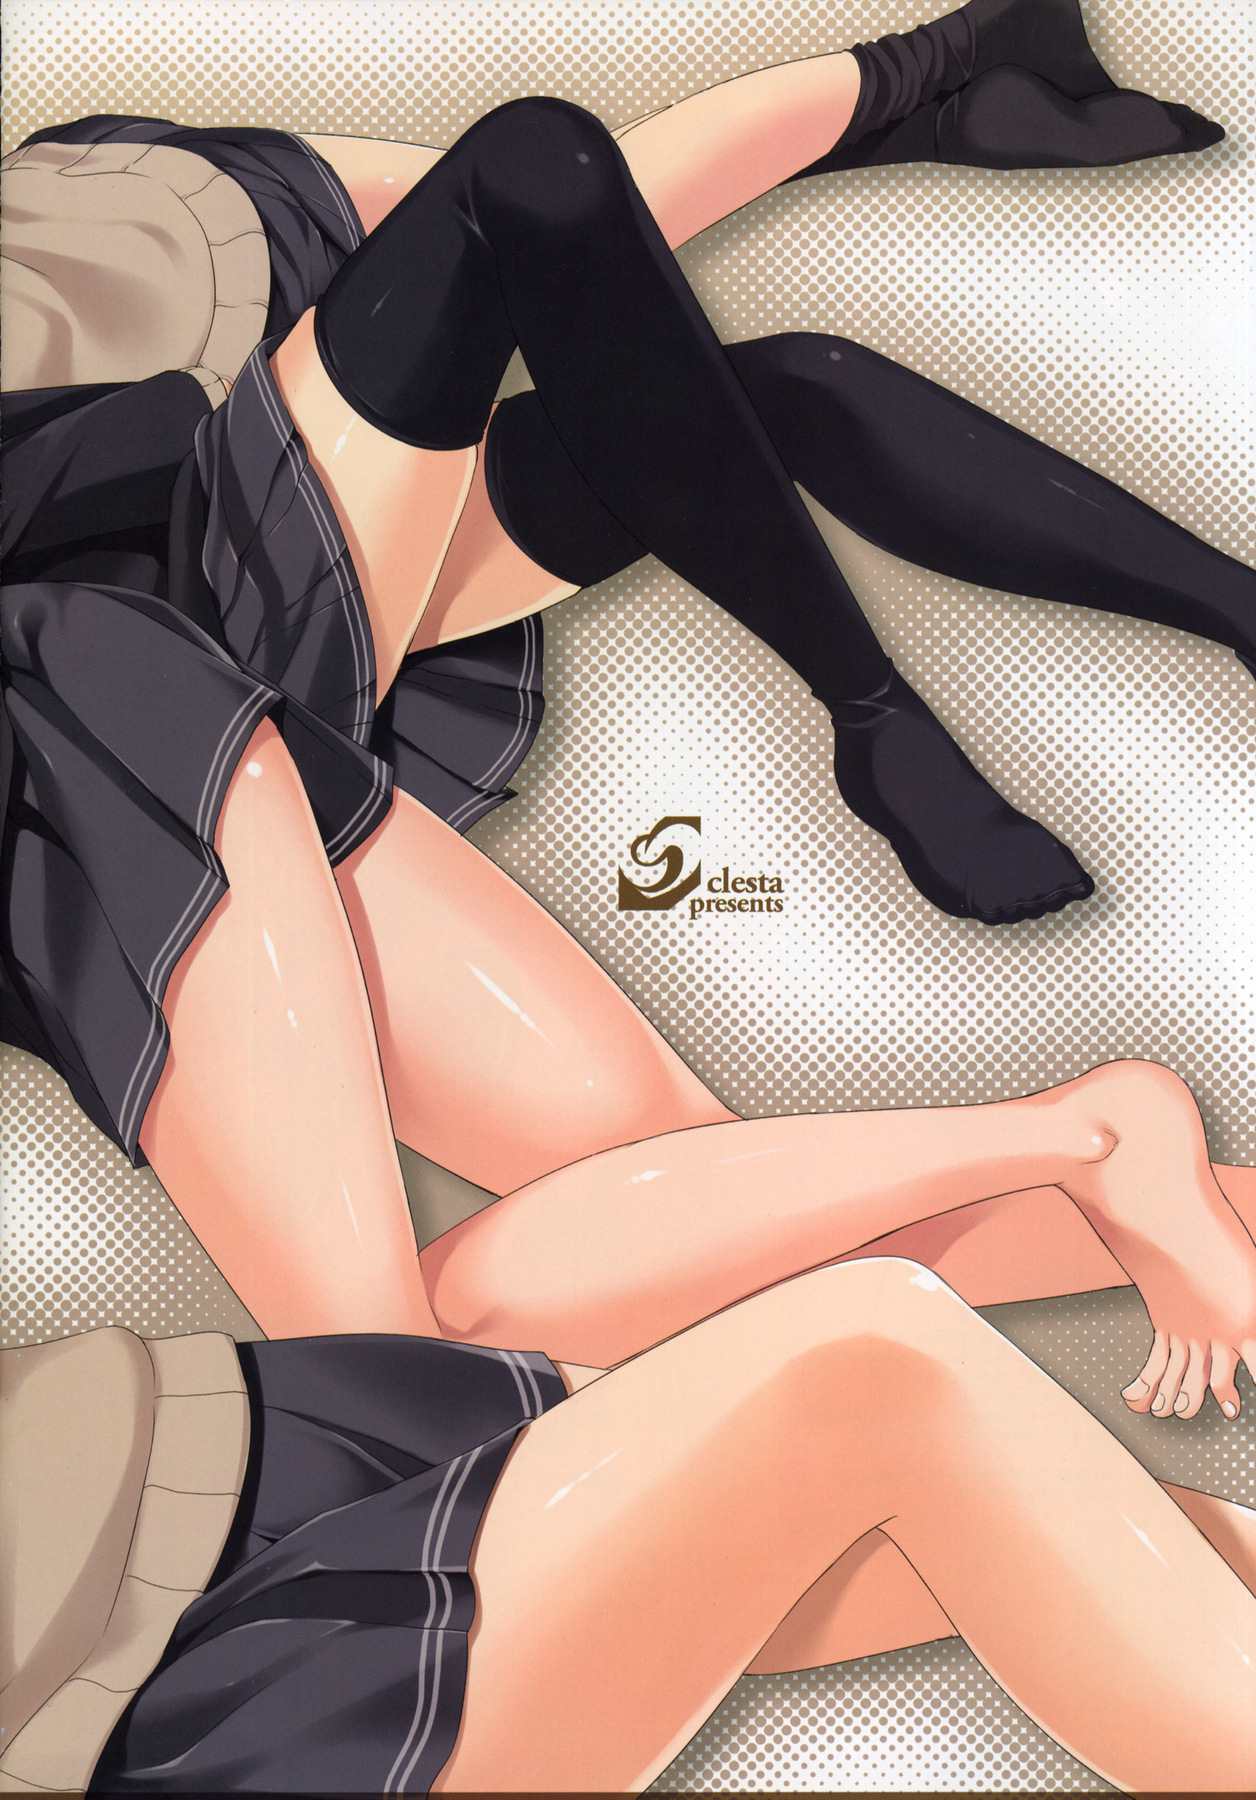 (COMIC1☆3) [Clesta (Cle Masahiro)] CL-orz'4 (Amagami) [Vietnamese Tiếng Việt] [Decensored] page 17 full